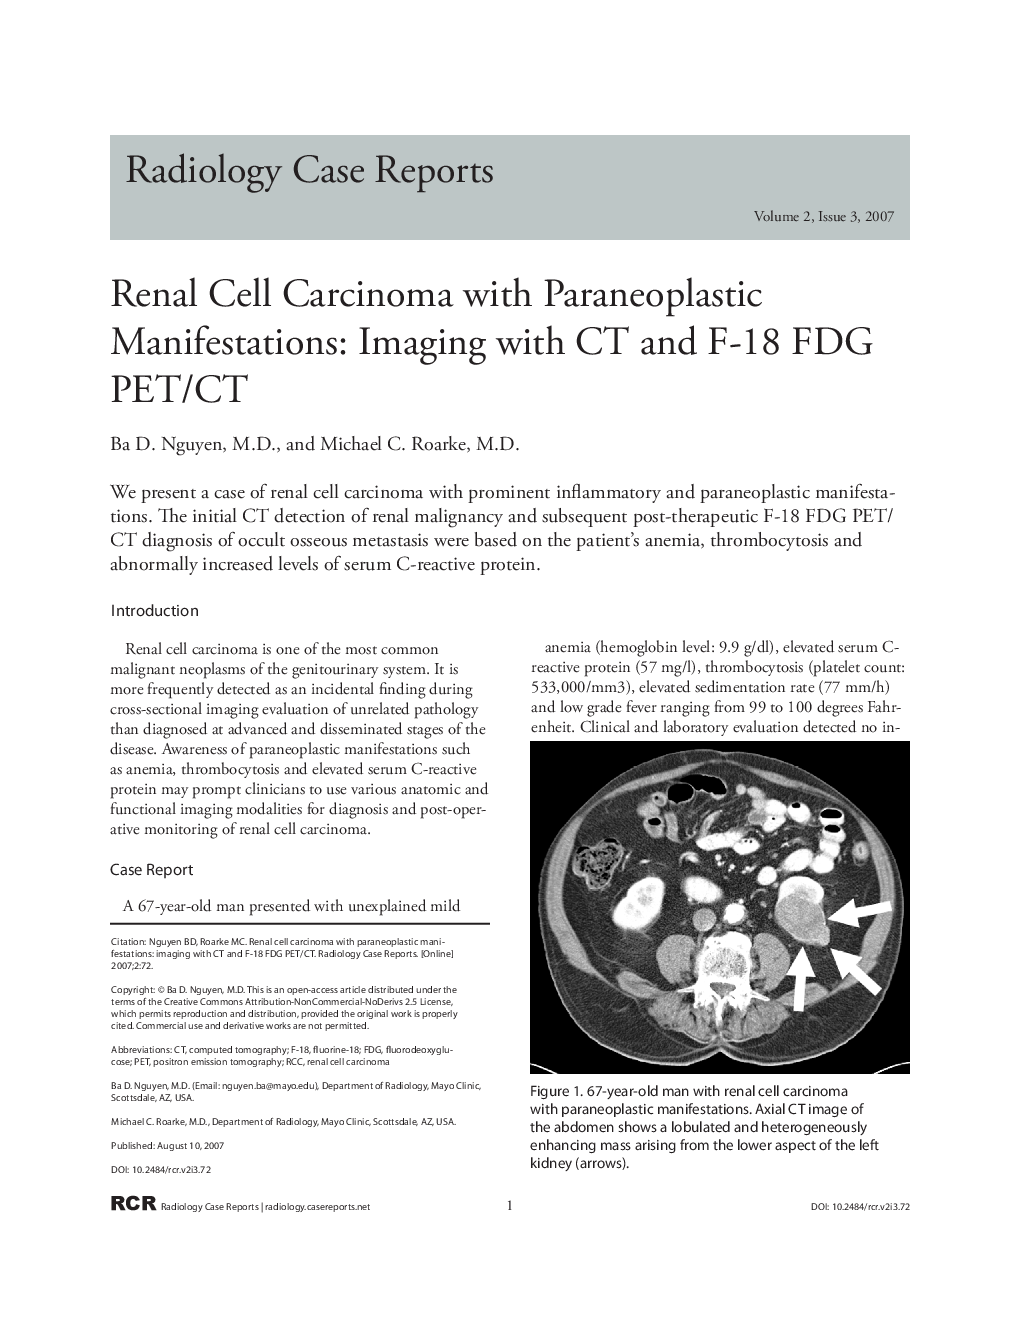 Renal Cell Carcinoma with Paraneoplastic Manifestations: Imaging with CT and F-18 FDG PET/CT